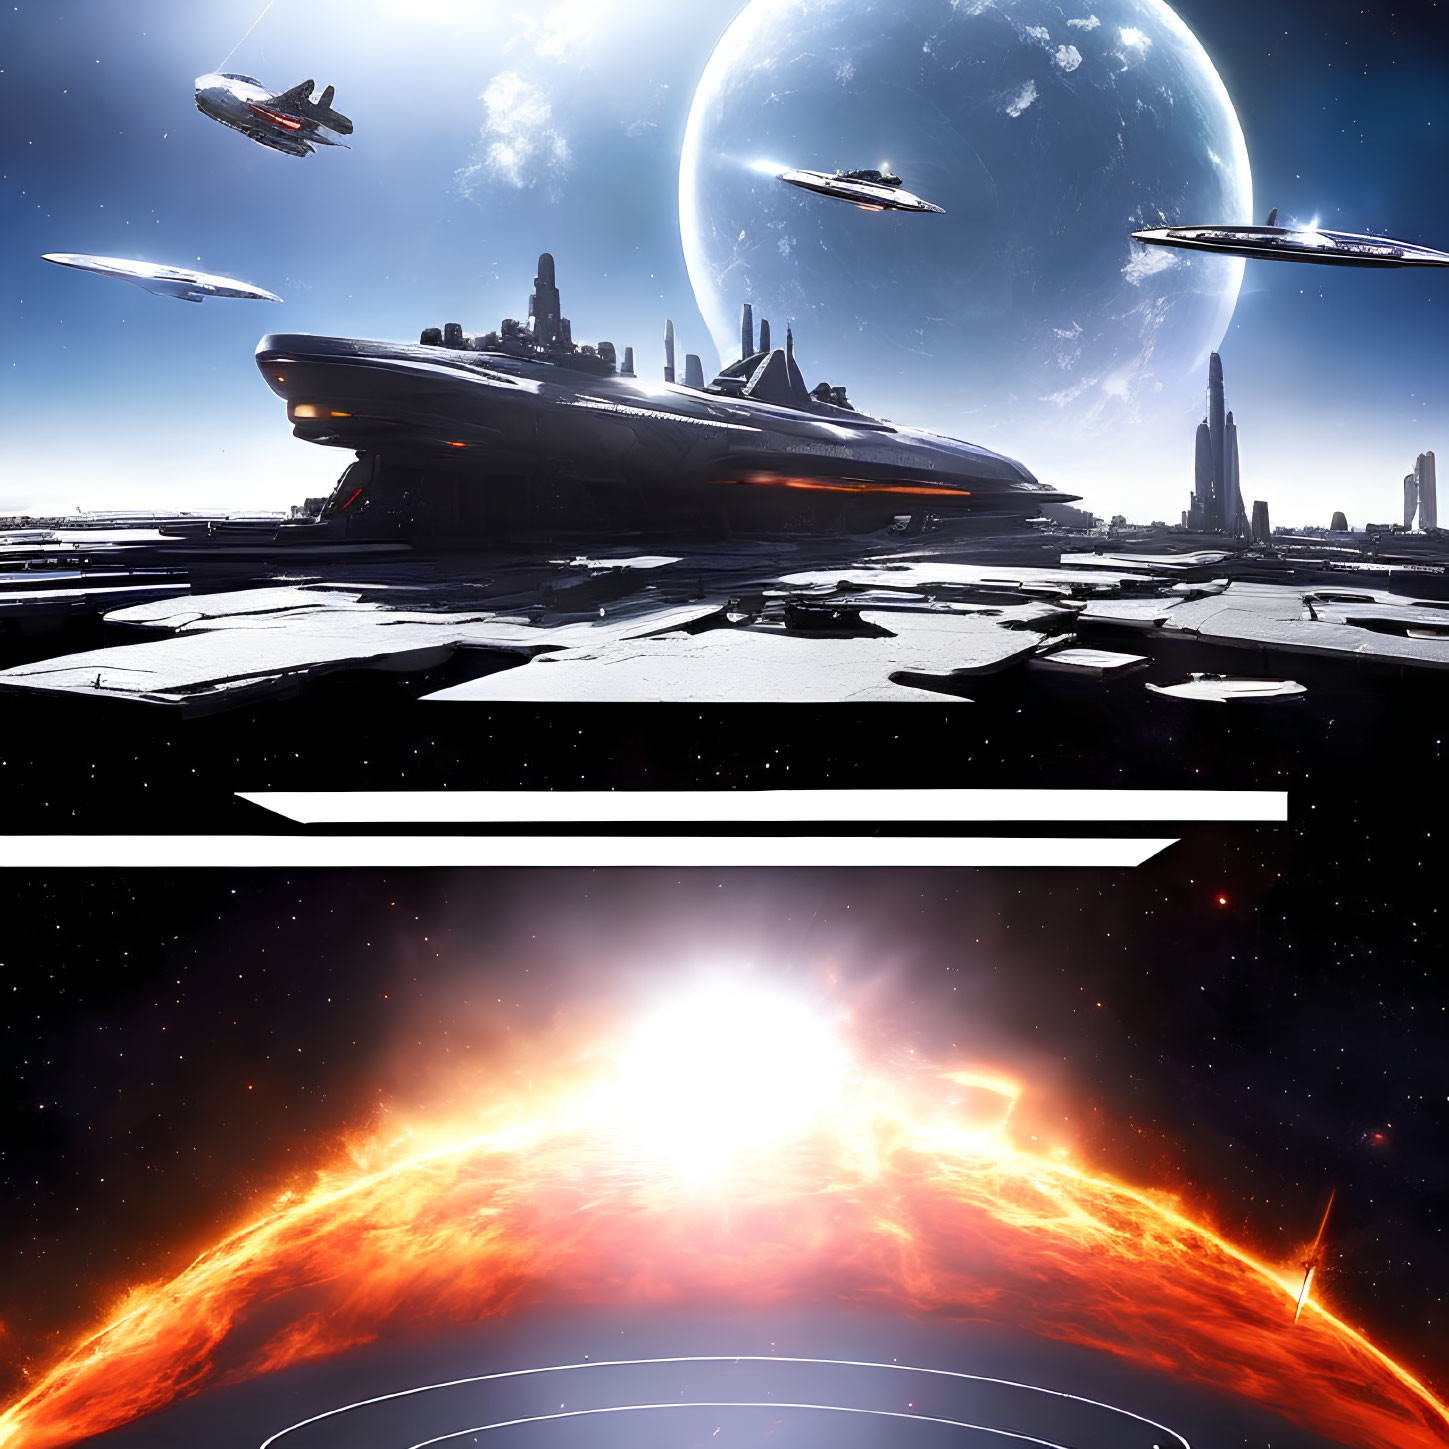 Futuristic space scene with hovering starships and cityscape backdrop